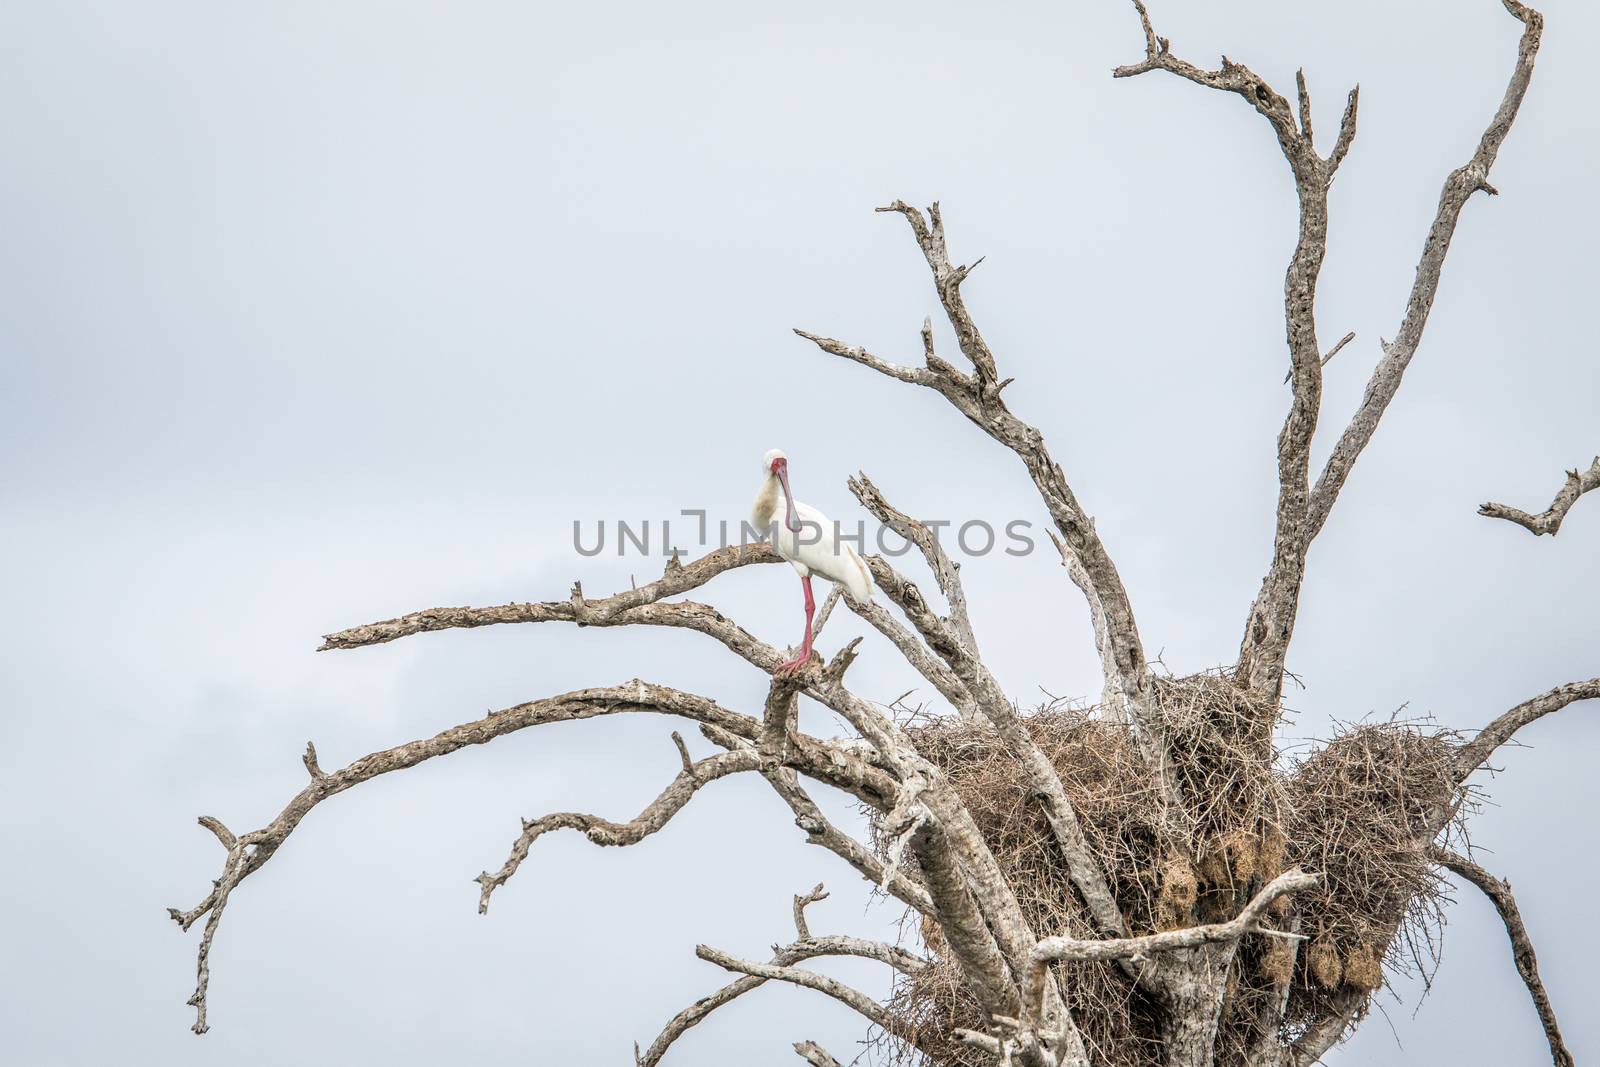 An African spoonbill sitting in a tree in the Kruger National Park, South Africa.